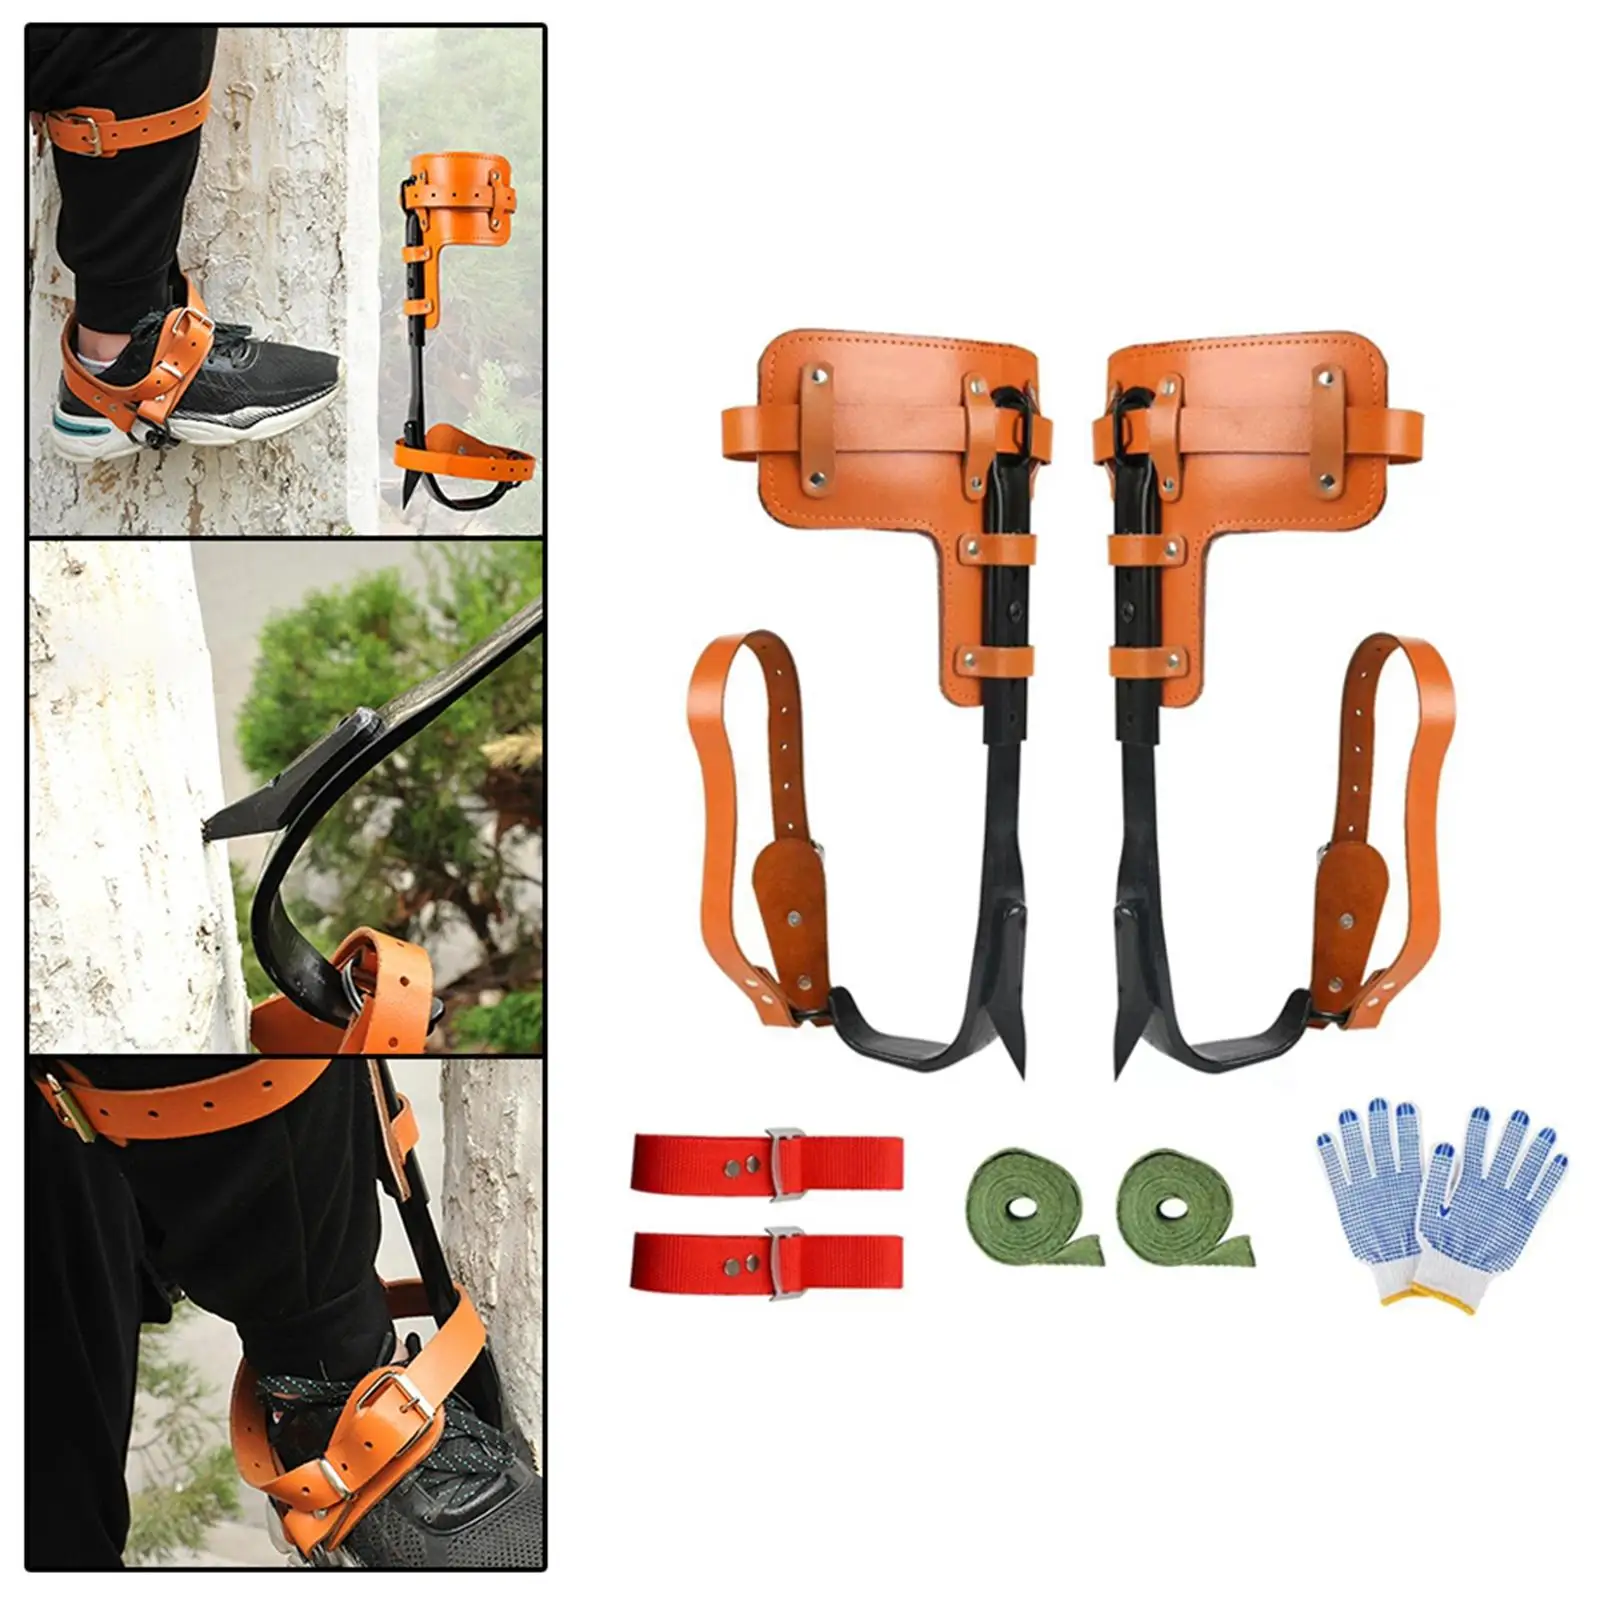 Tree Climbing Spike with Gloves Straps Tree Climbing Equipment Tree Spikes Tree Gripper for Climbing Trees Cutting Tree Camping